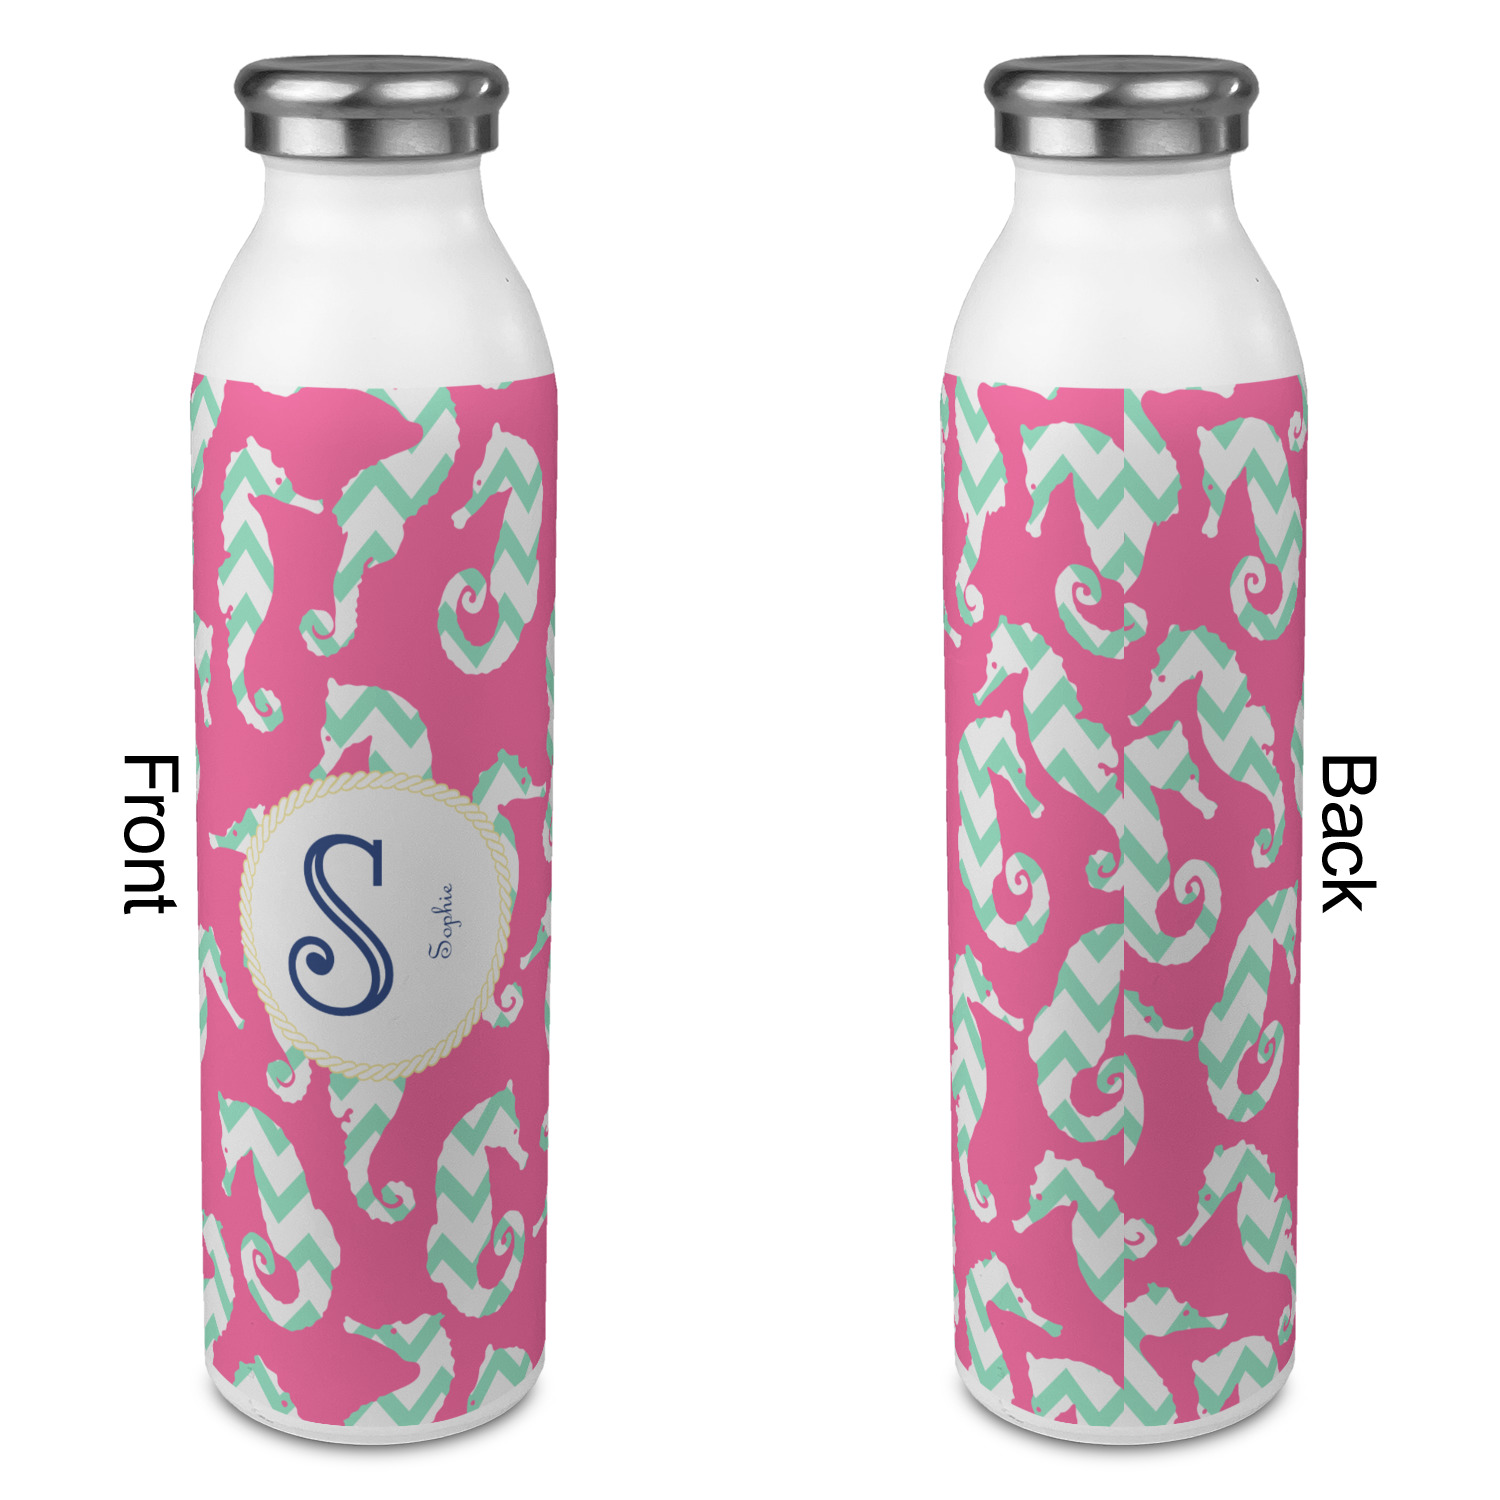  YouCustomizeIt Personalized Preppy Water Bottle